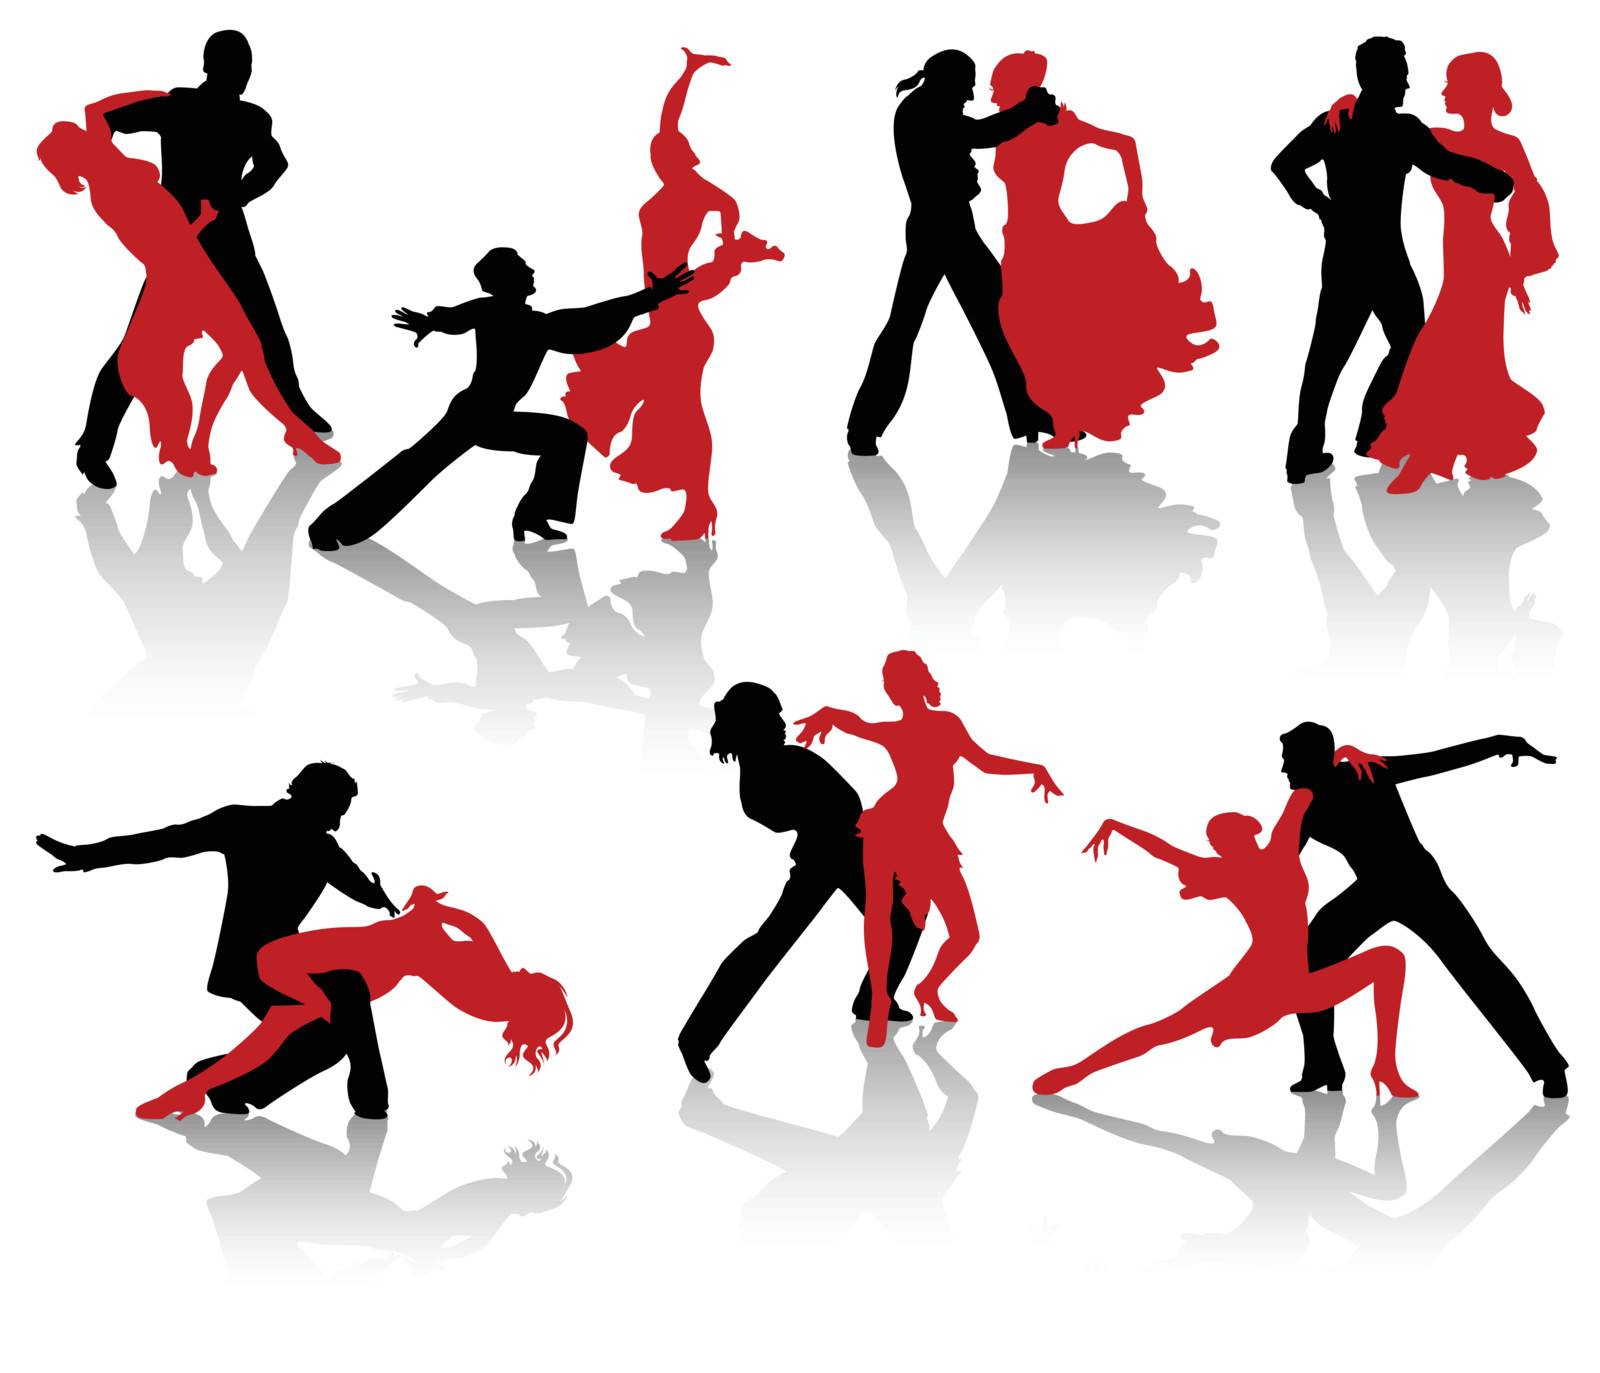 Silhouettes of the pairs dancing by Kamensky